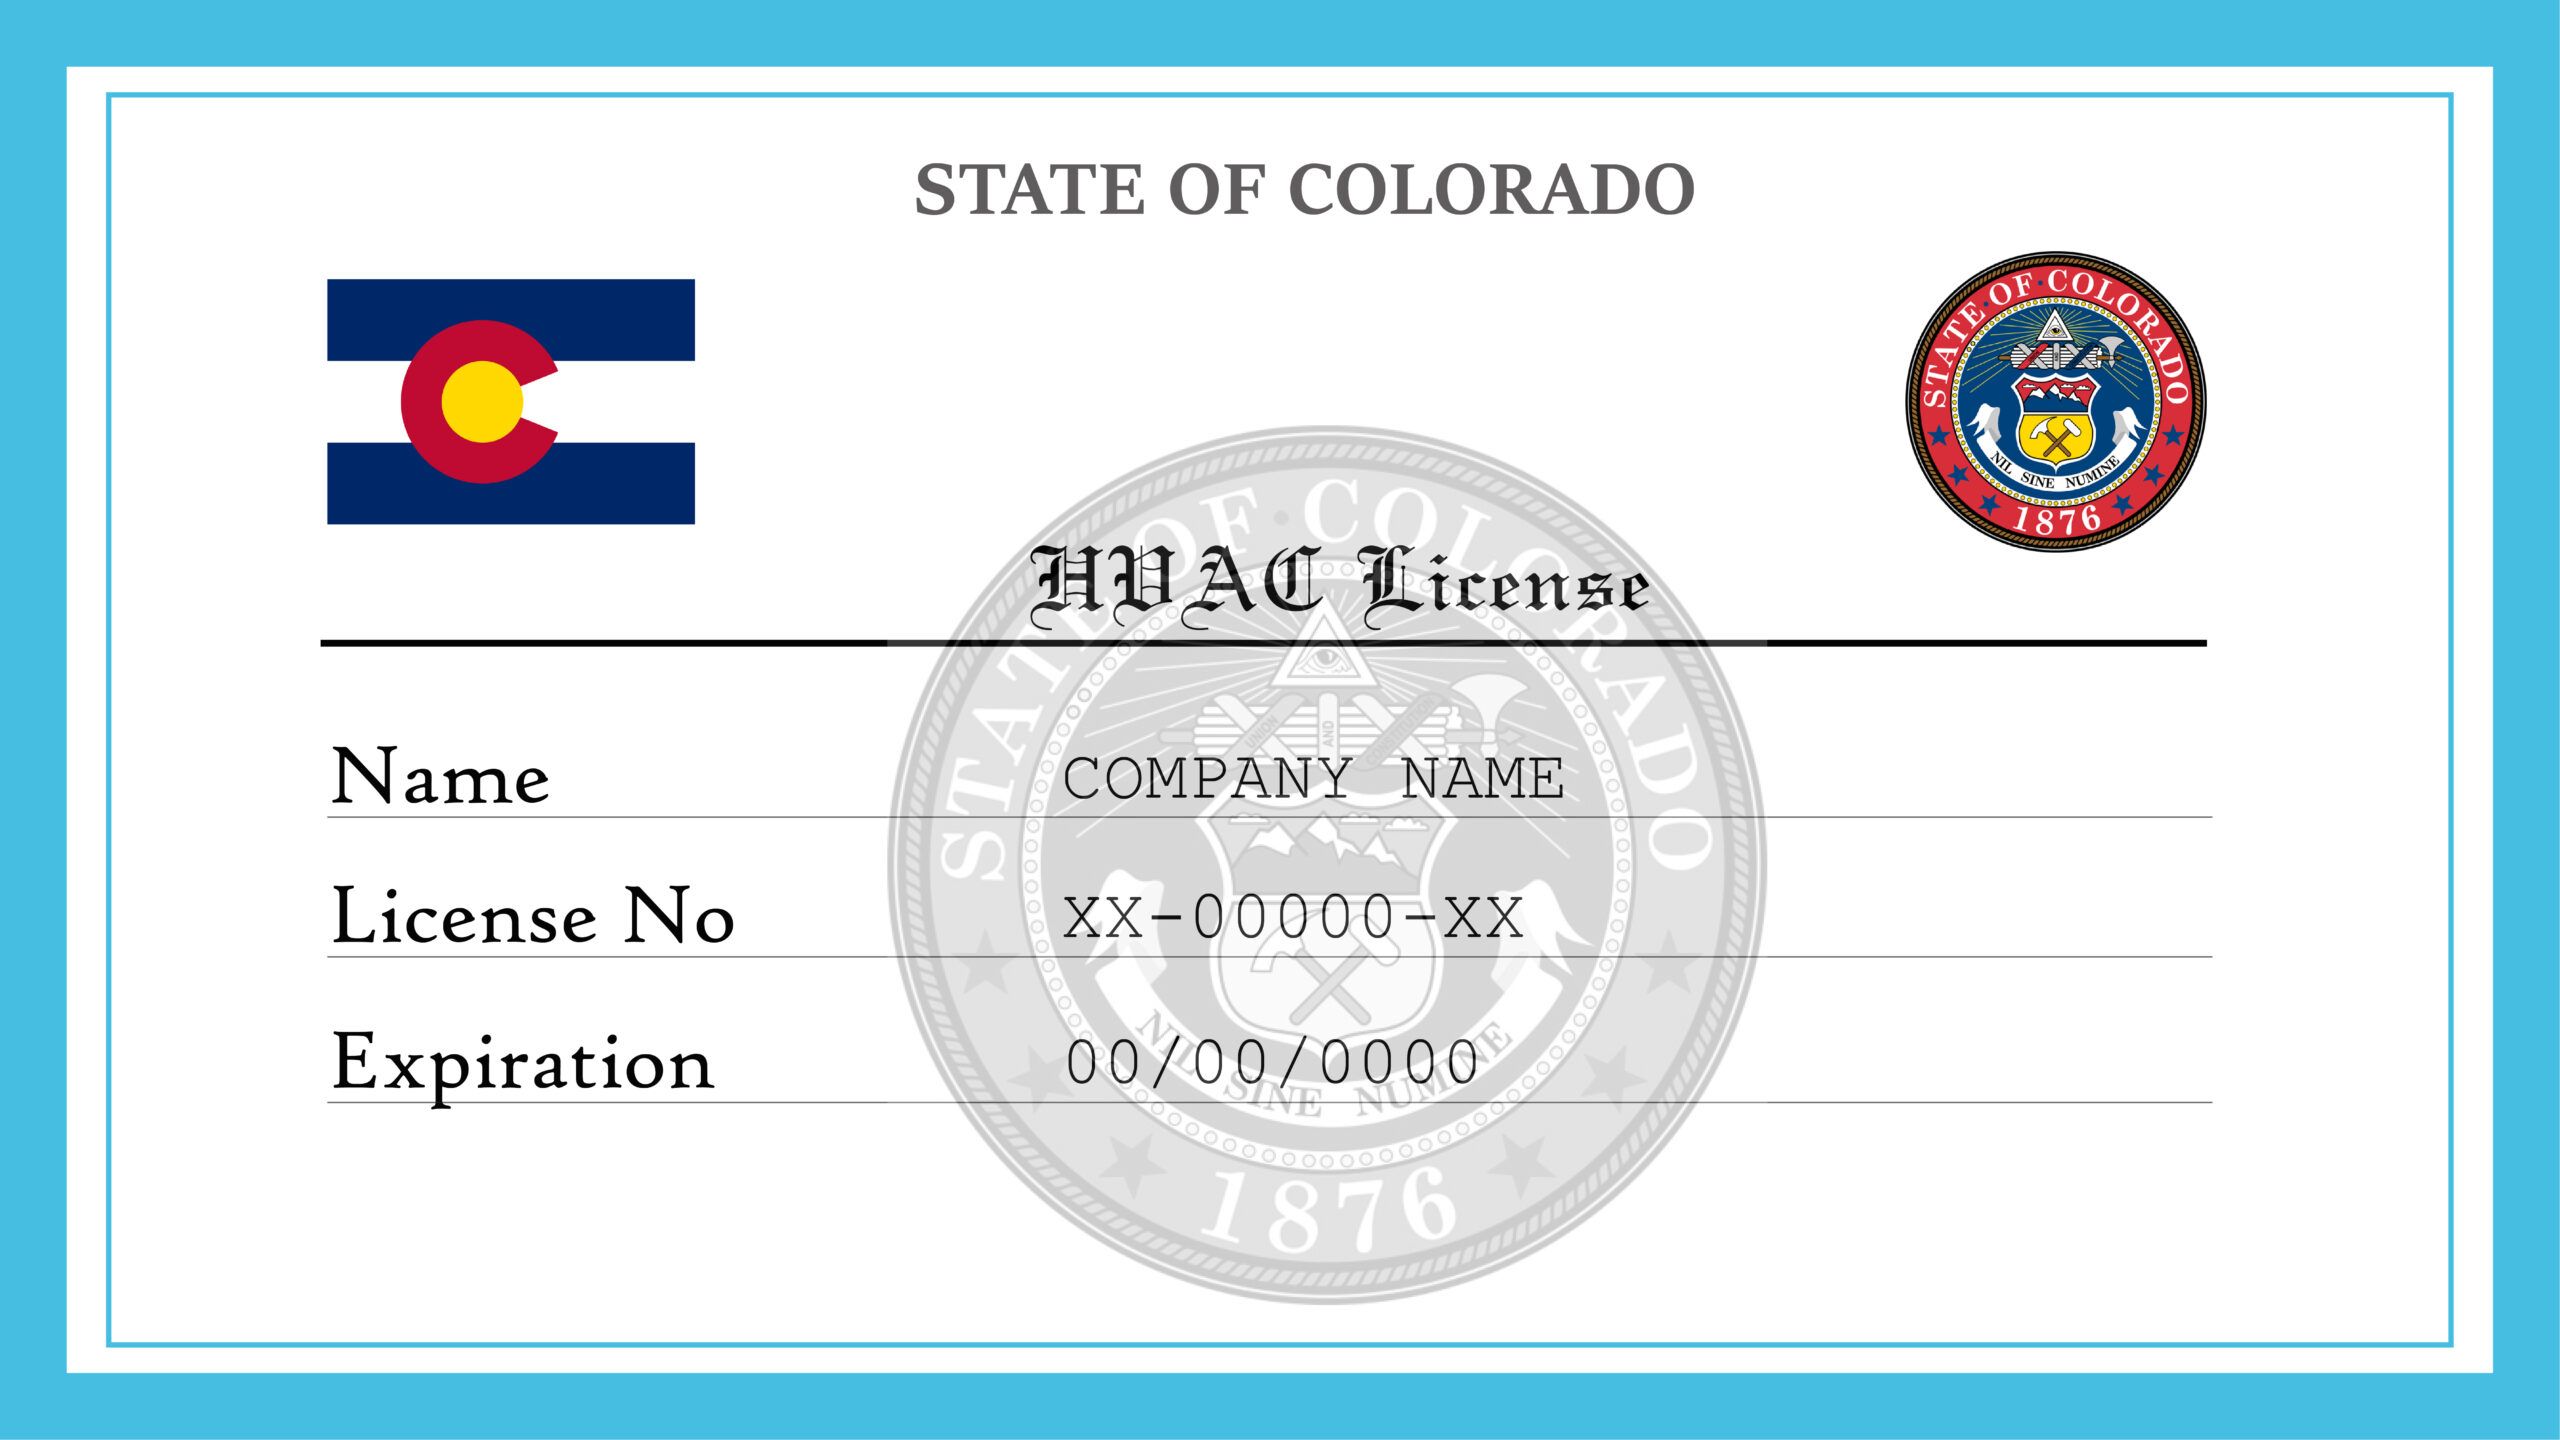 Colorado Division of Professions and Occupations - Renew a License - wide 7